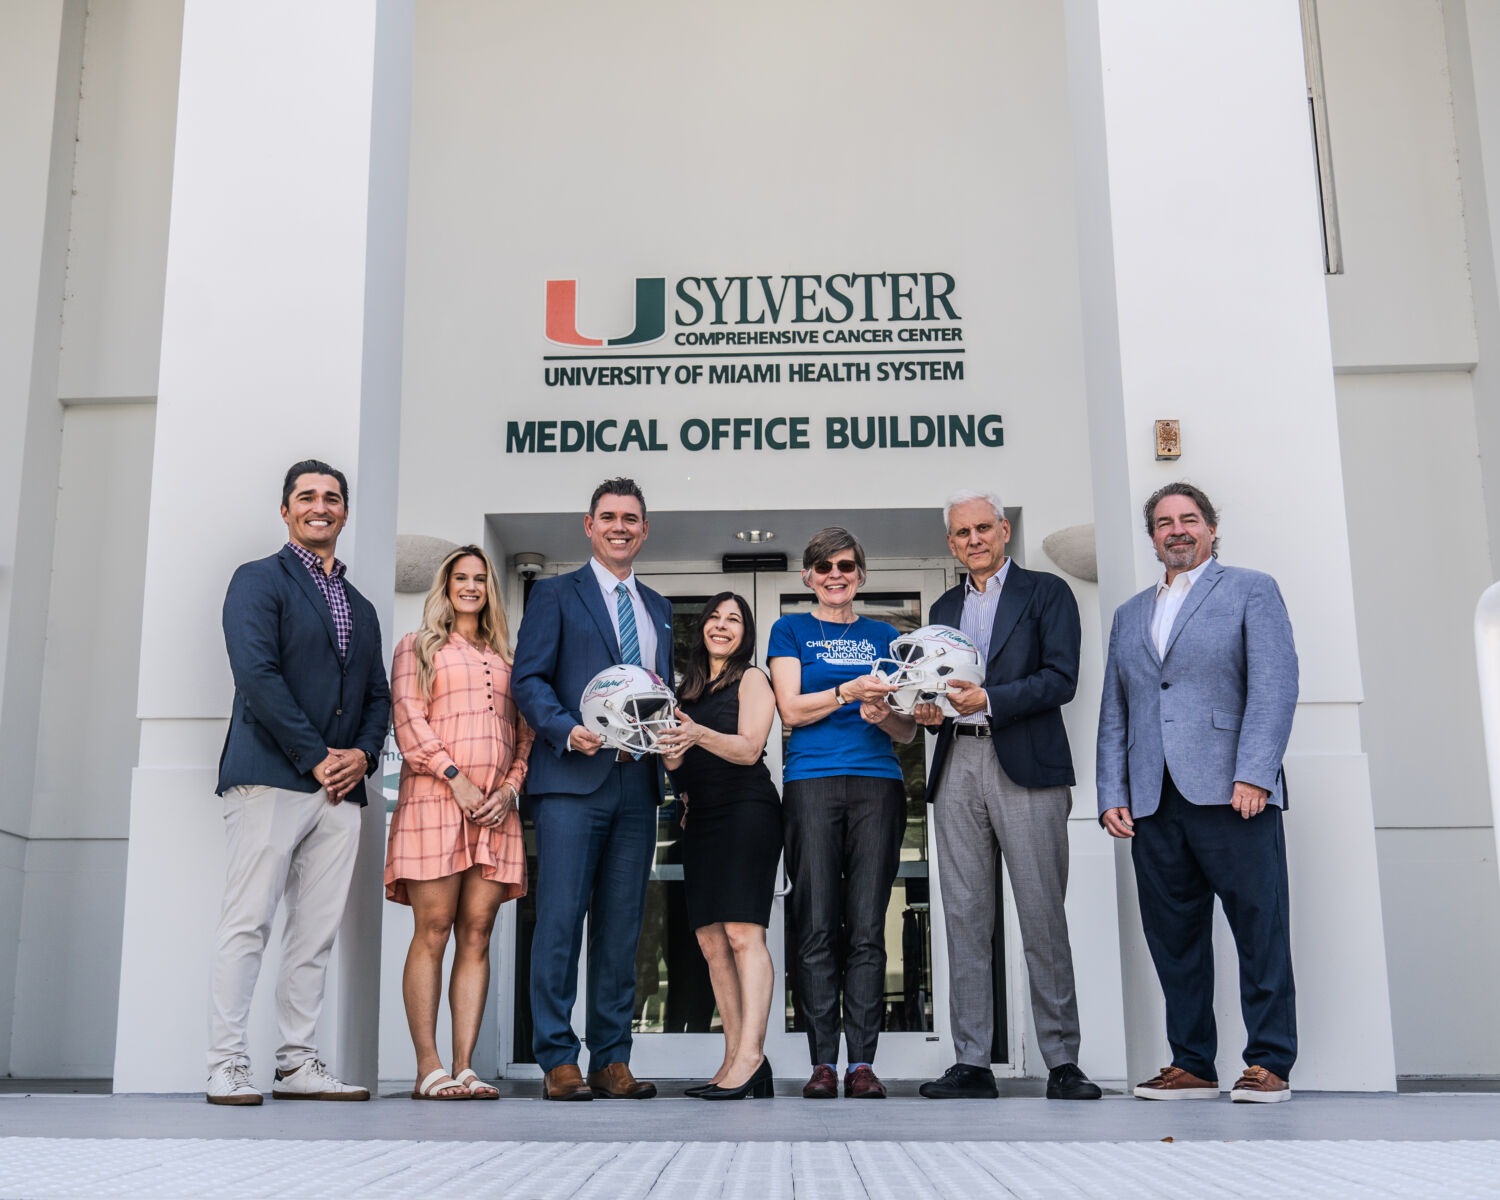 Group of seven adults standing in front of the university of miami sylvester comprehensive cancer center, holding commemorative football helmets.